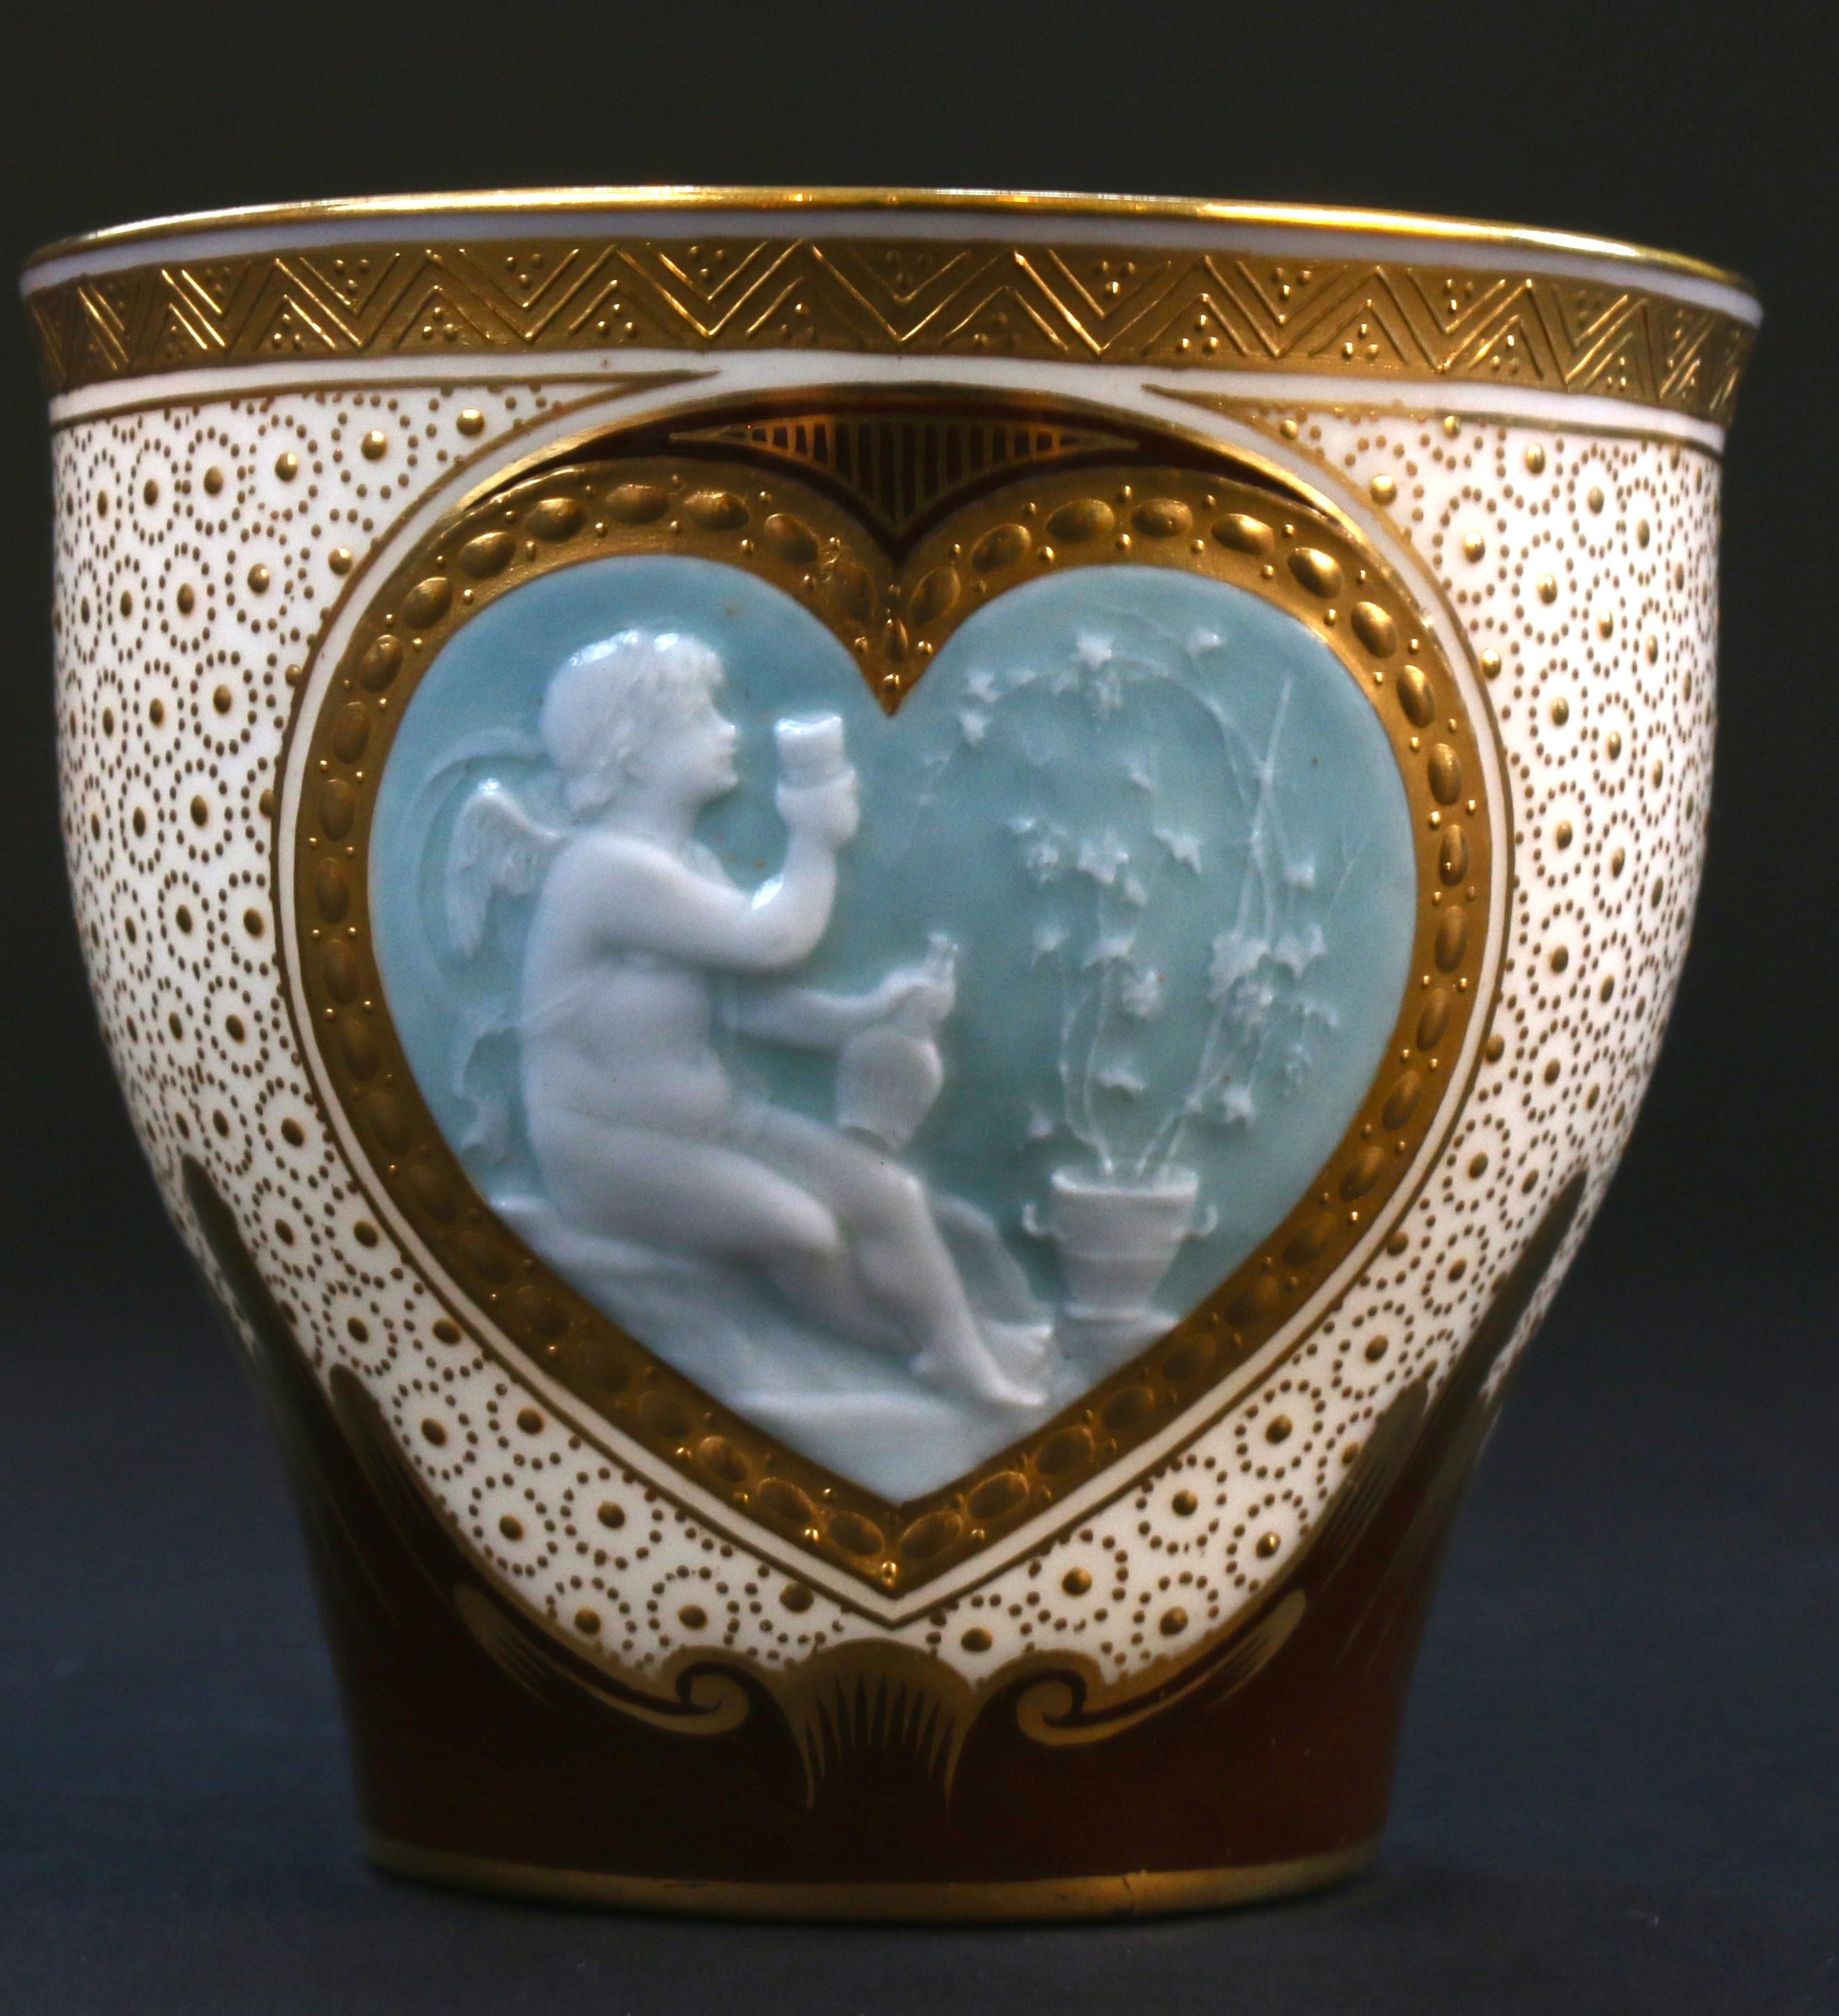 This rarely available Minton pate sur pate cup would make a wonderful display item or addition to a collection. The cup contains a 22-karat gold outlined heart-shaped pate sur pate plaque, rendered with white slip on a blue background, featuring a